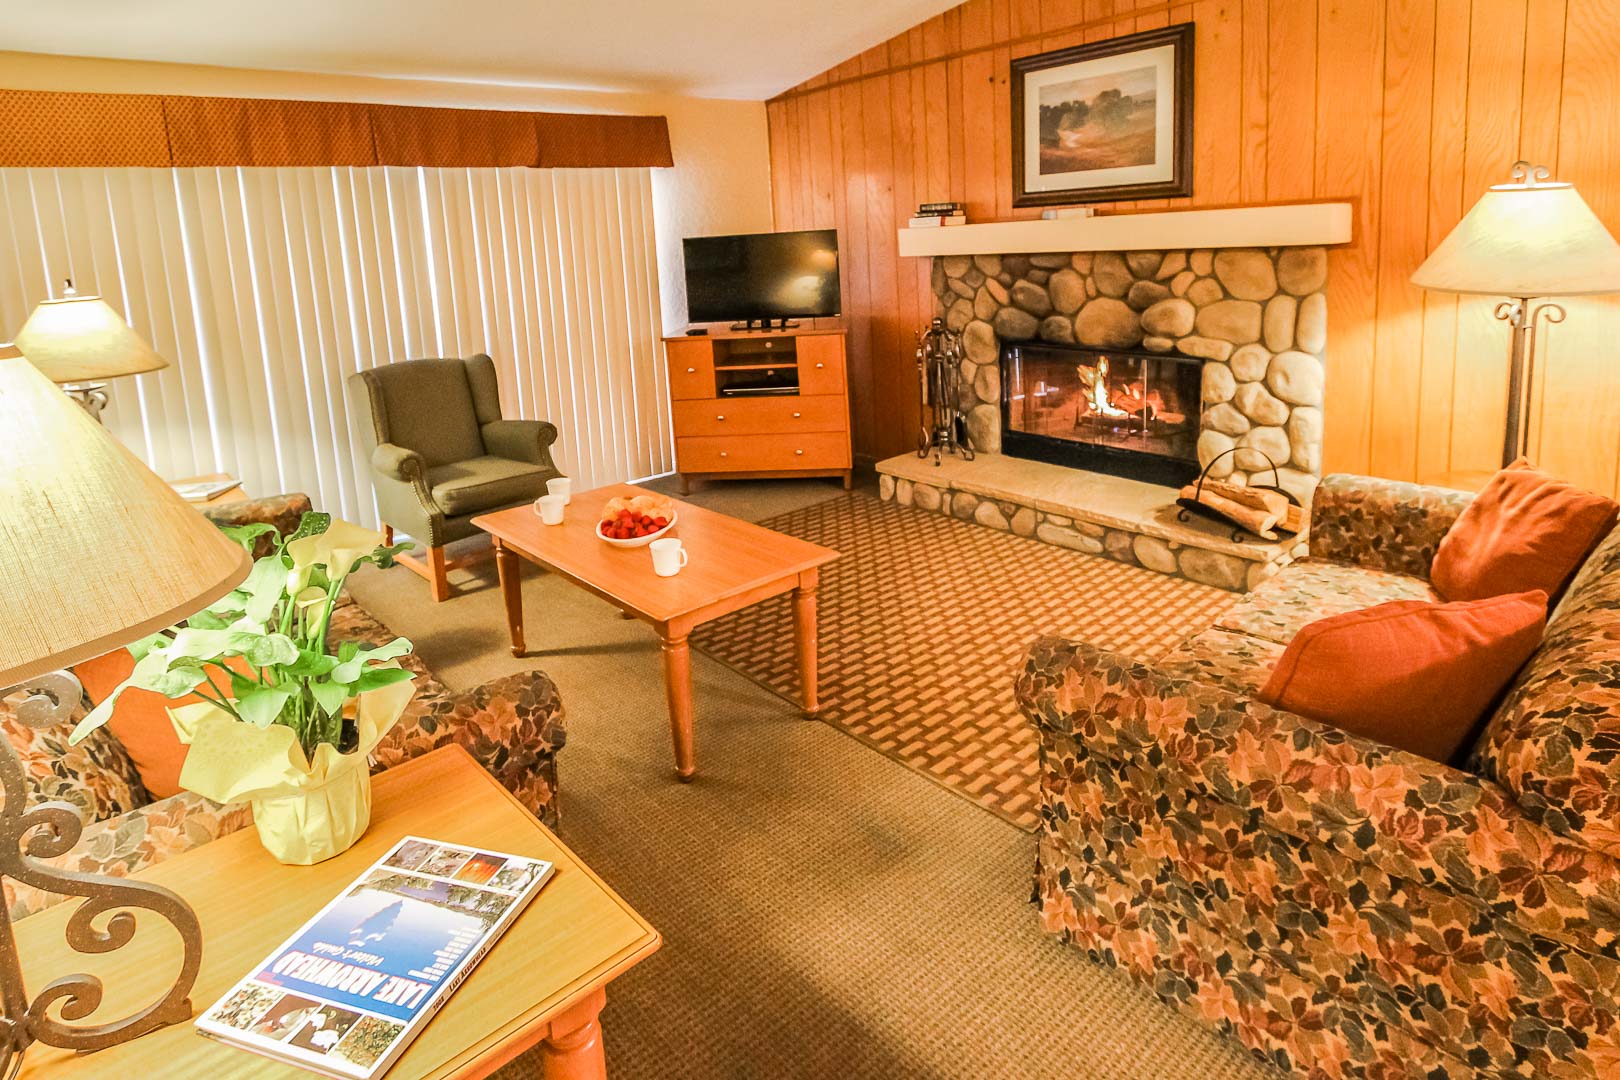 A charming living room area at VRI's Lake Arrowhead Chalets in California.